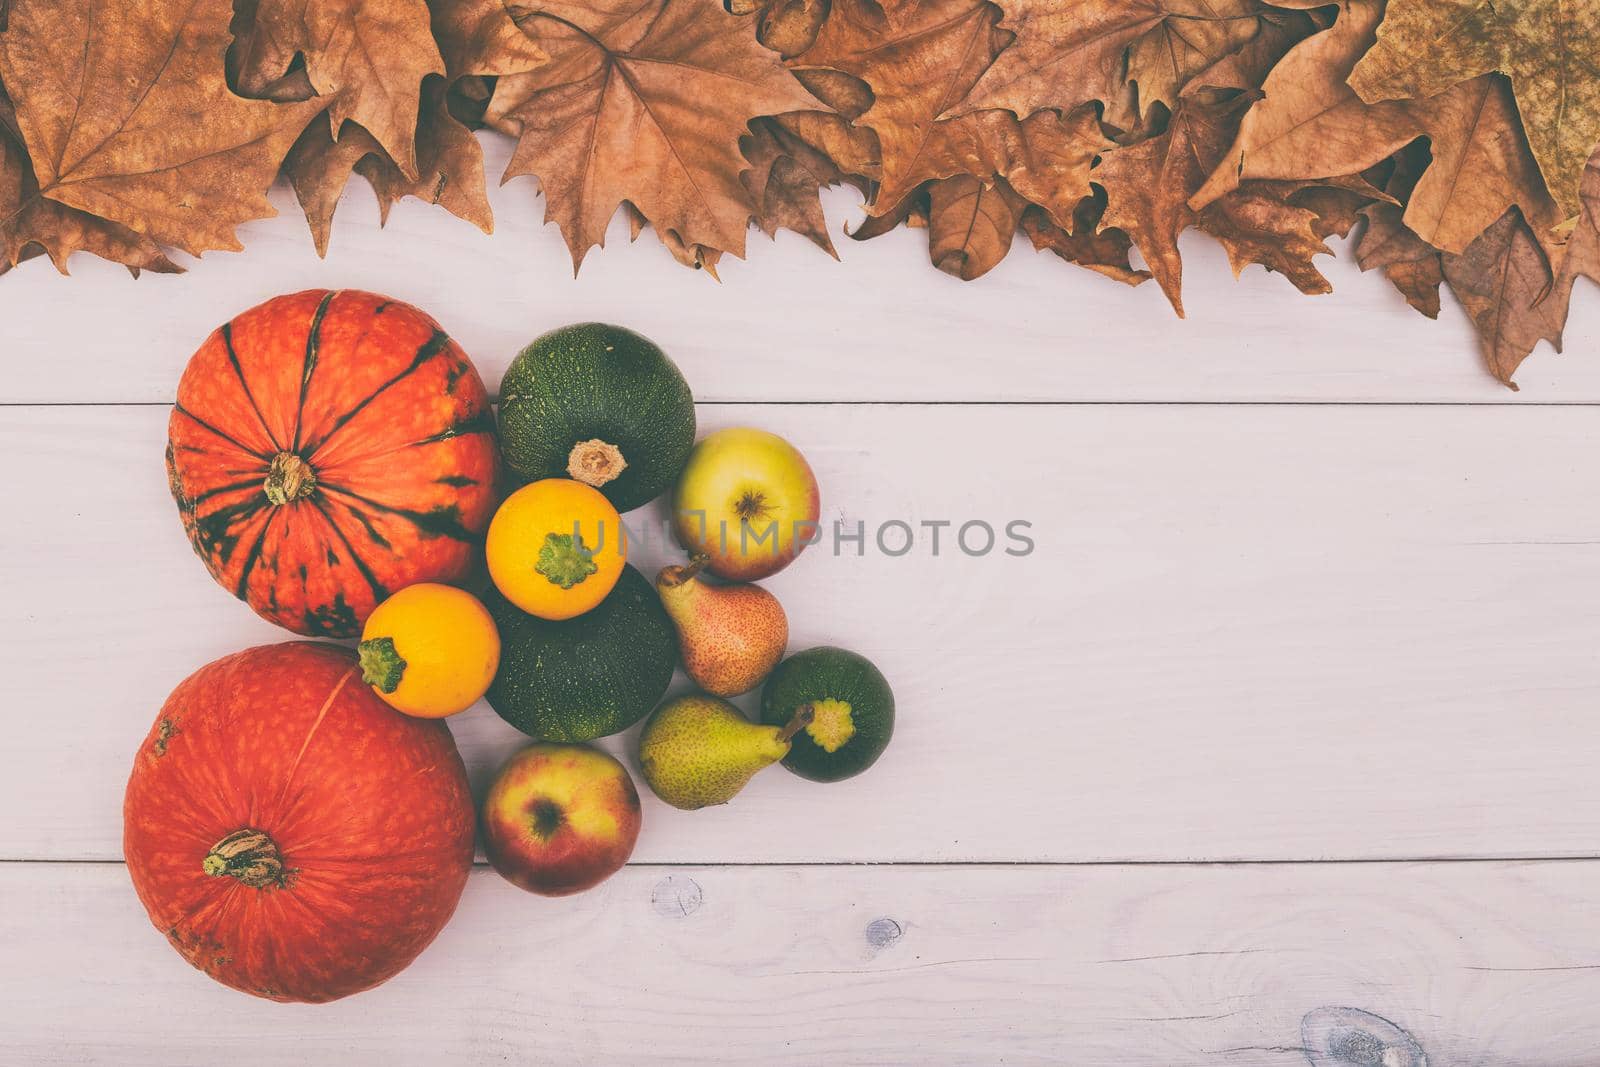 Image of pumpkins,apples and pears on wooden table with autumn leaves.Image is intentionally toned.